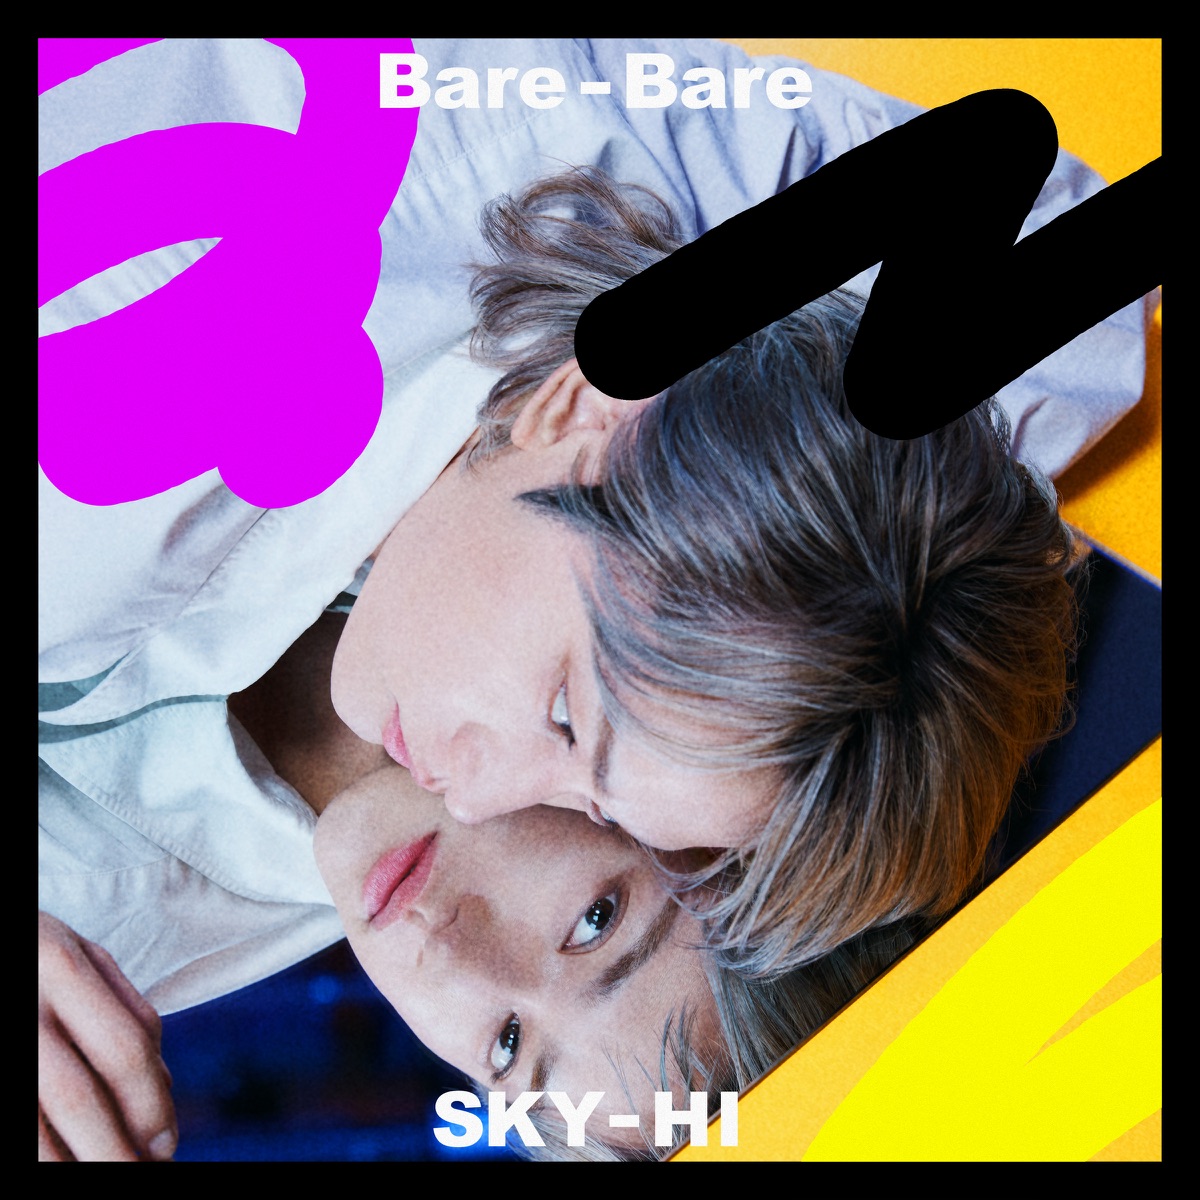 Cover art for『SKY-HI - Bare-Bare』from the release『Bare-Bare』